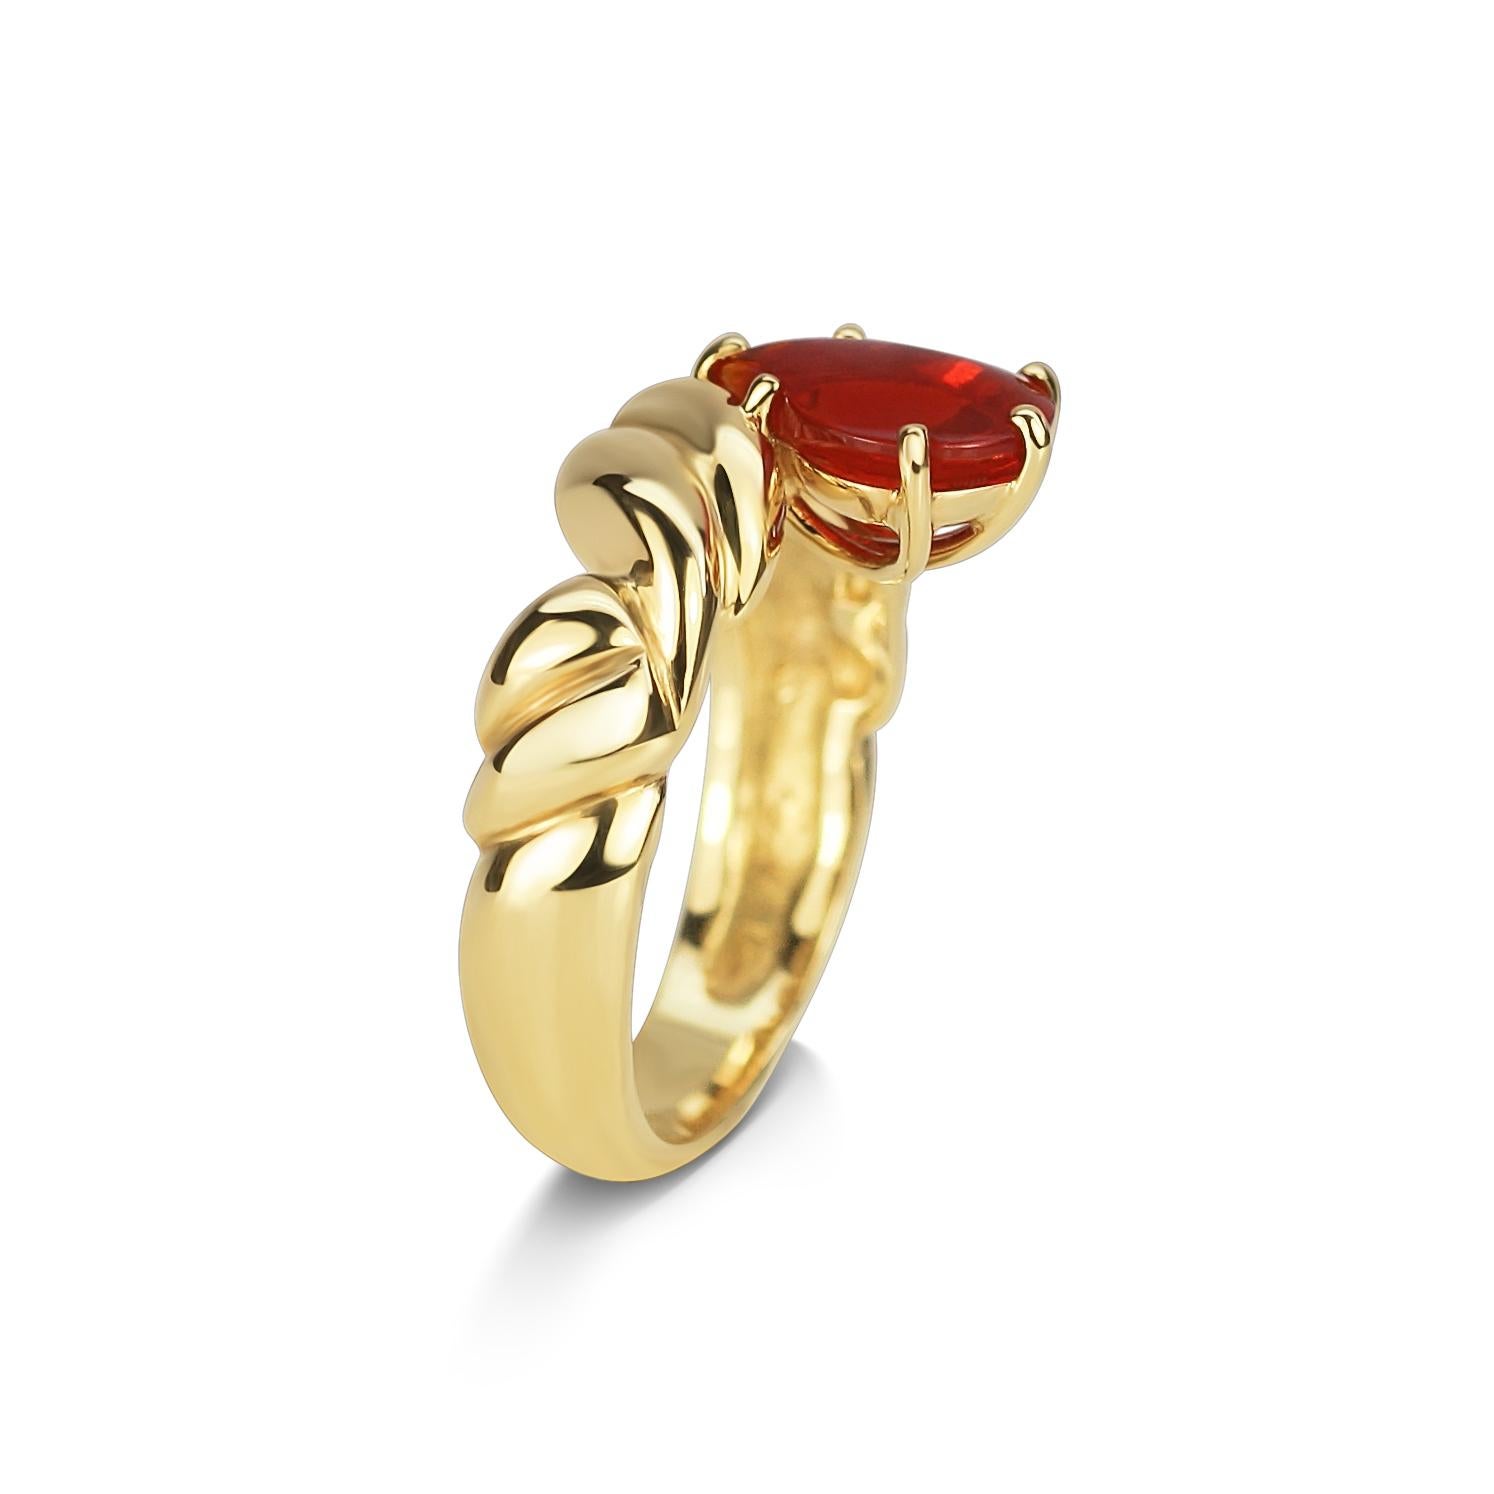 Fire Opal Paisley Teardrop Shape in 18 Carat Yellow Gold Carved Woven Band In New Condition For Sale In London, GB